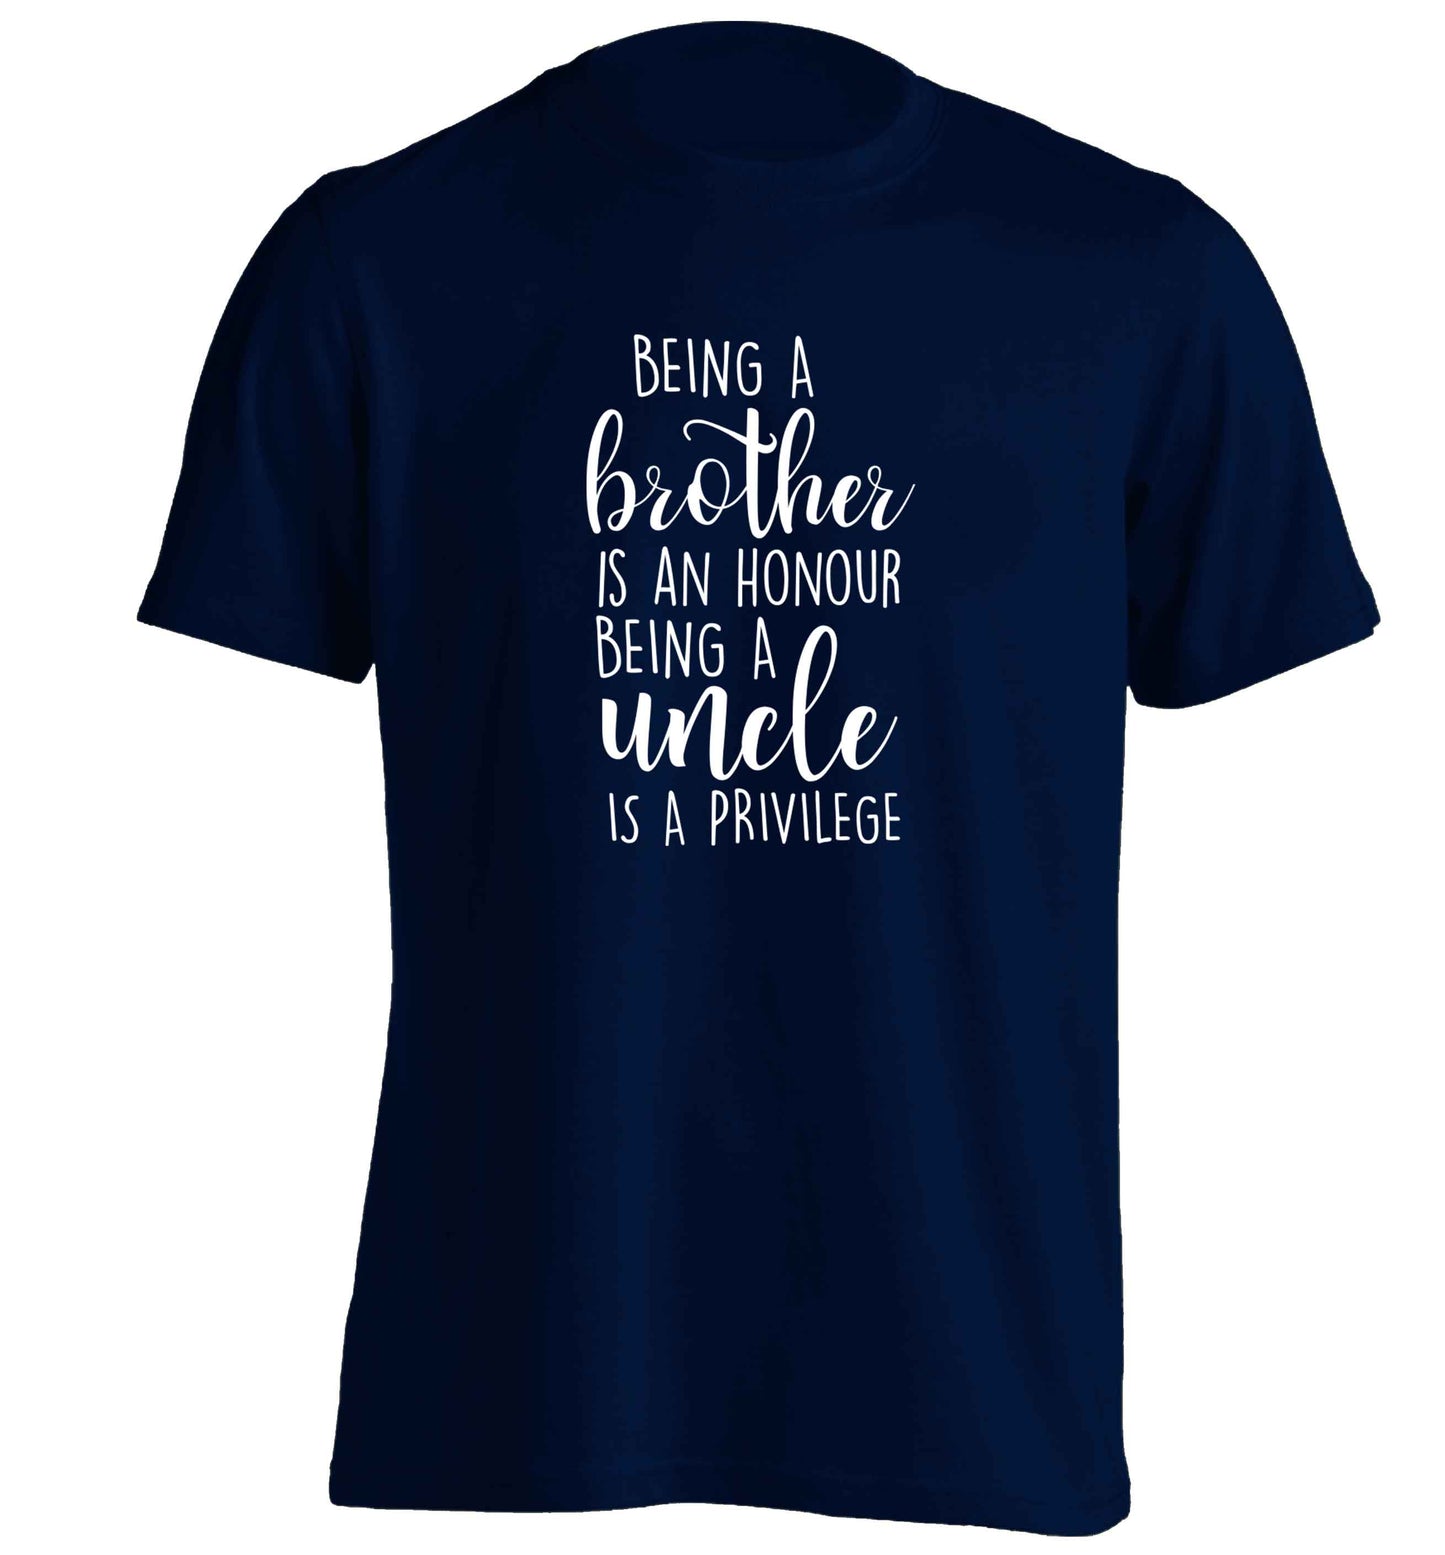 Being a brother is an honour being an uncle is a privilege adults unisex navy Tshirt 2XL